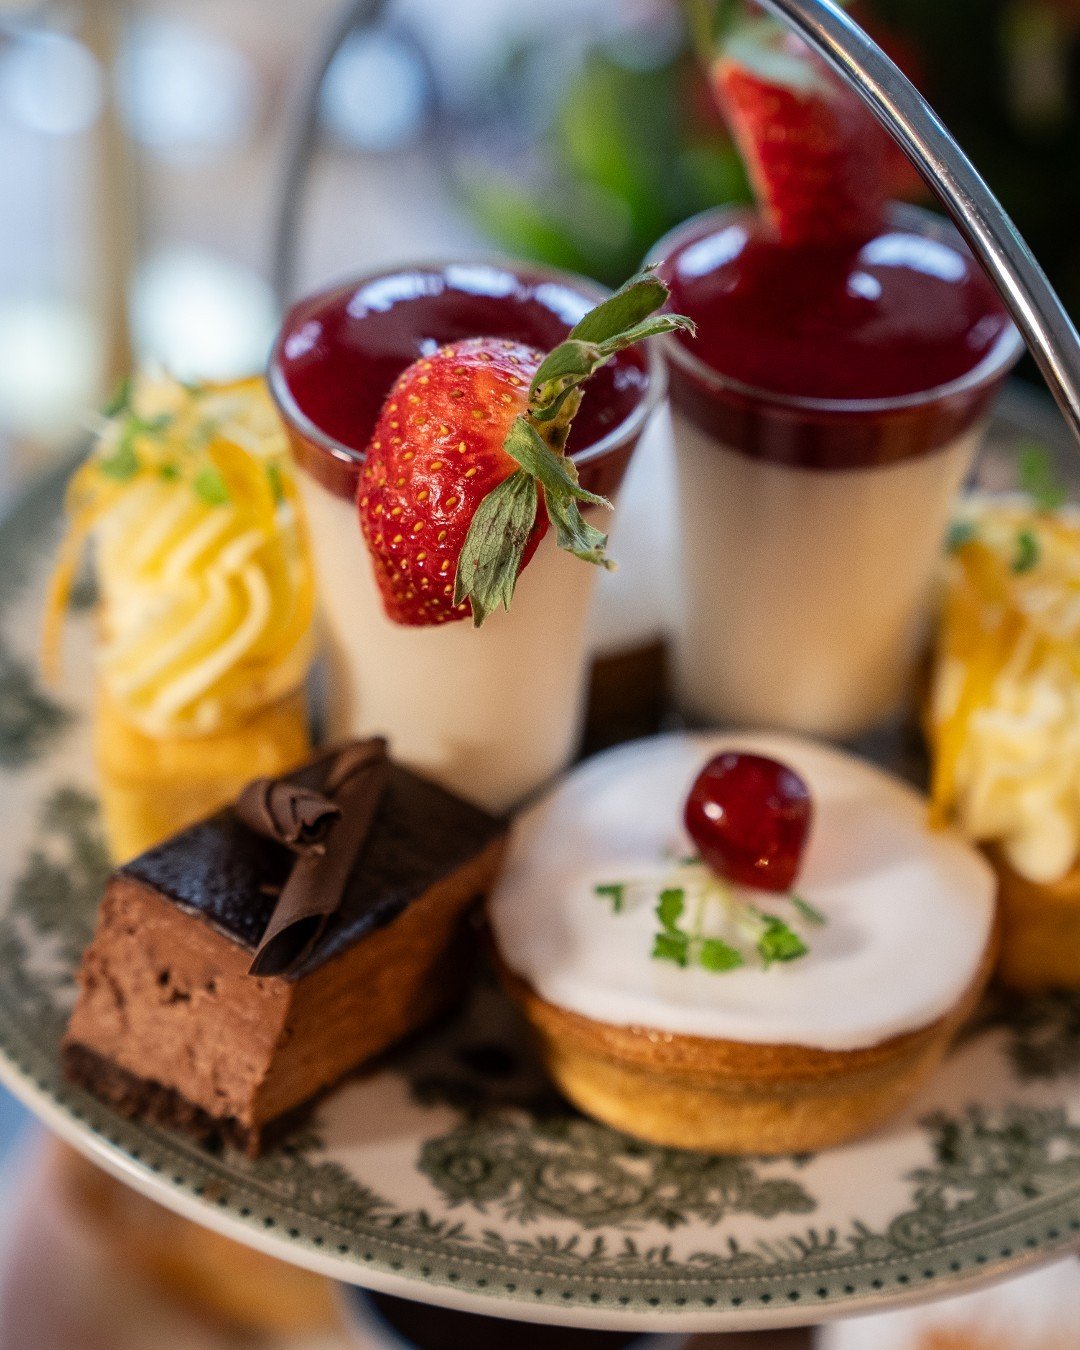 Who says Afternoon Tea is just for afternoons? At Balmer Lawn, we believe in breaking the rules (and maybe a scone or two). 👀🍰 

So grab a friend who eats just as much as you and let's get this par-tea started...